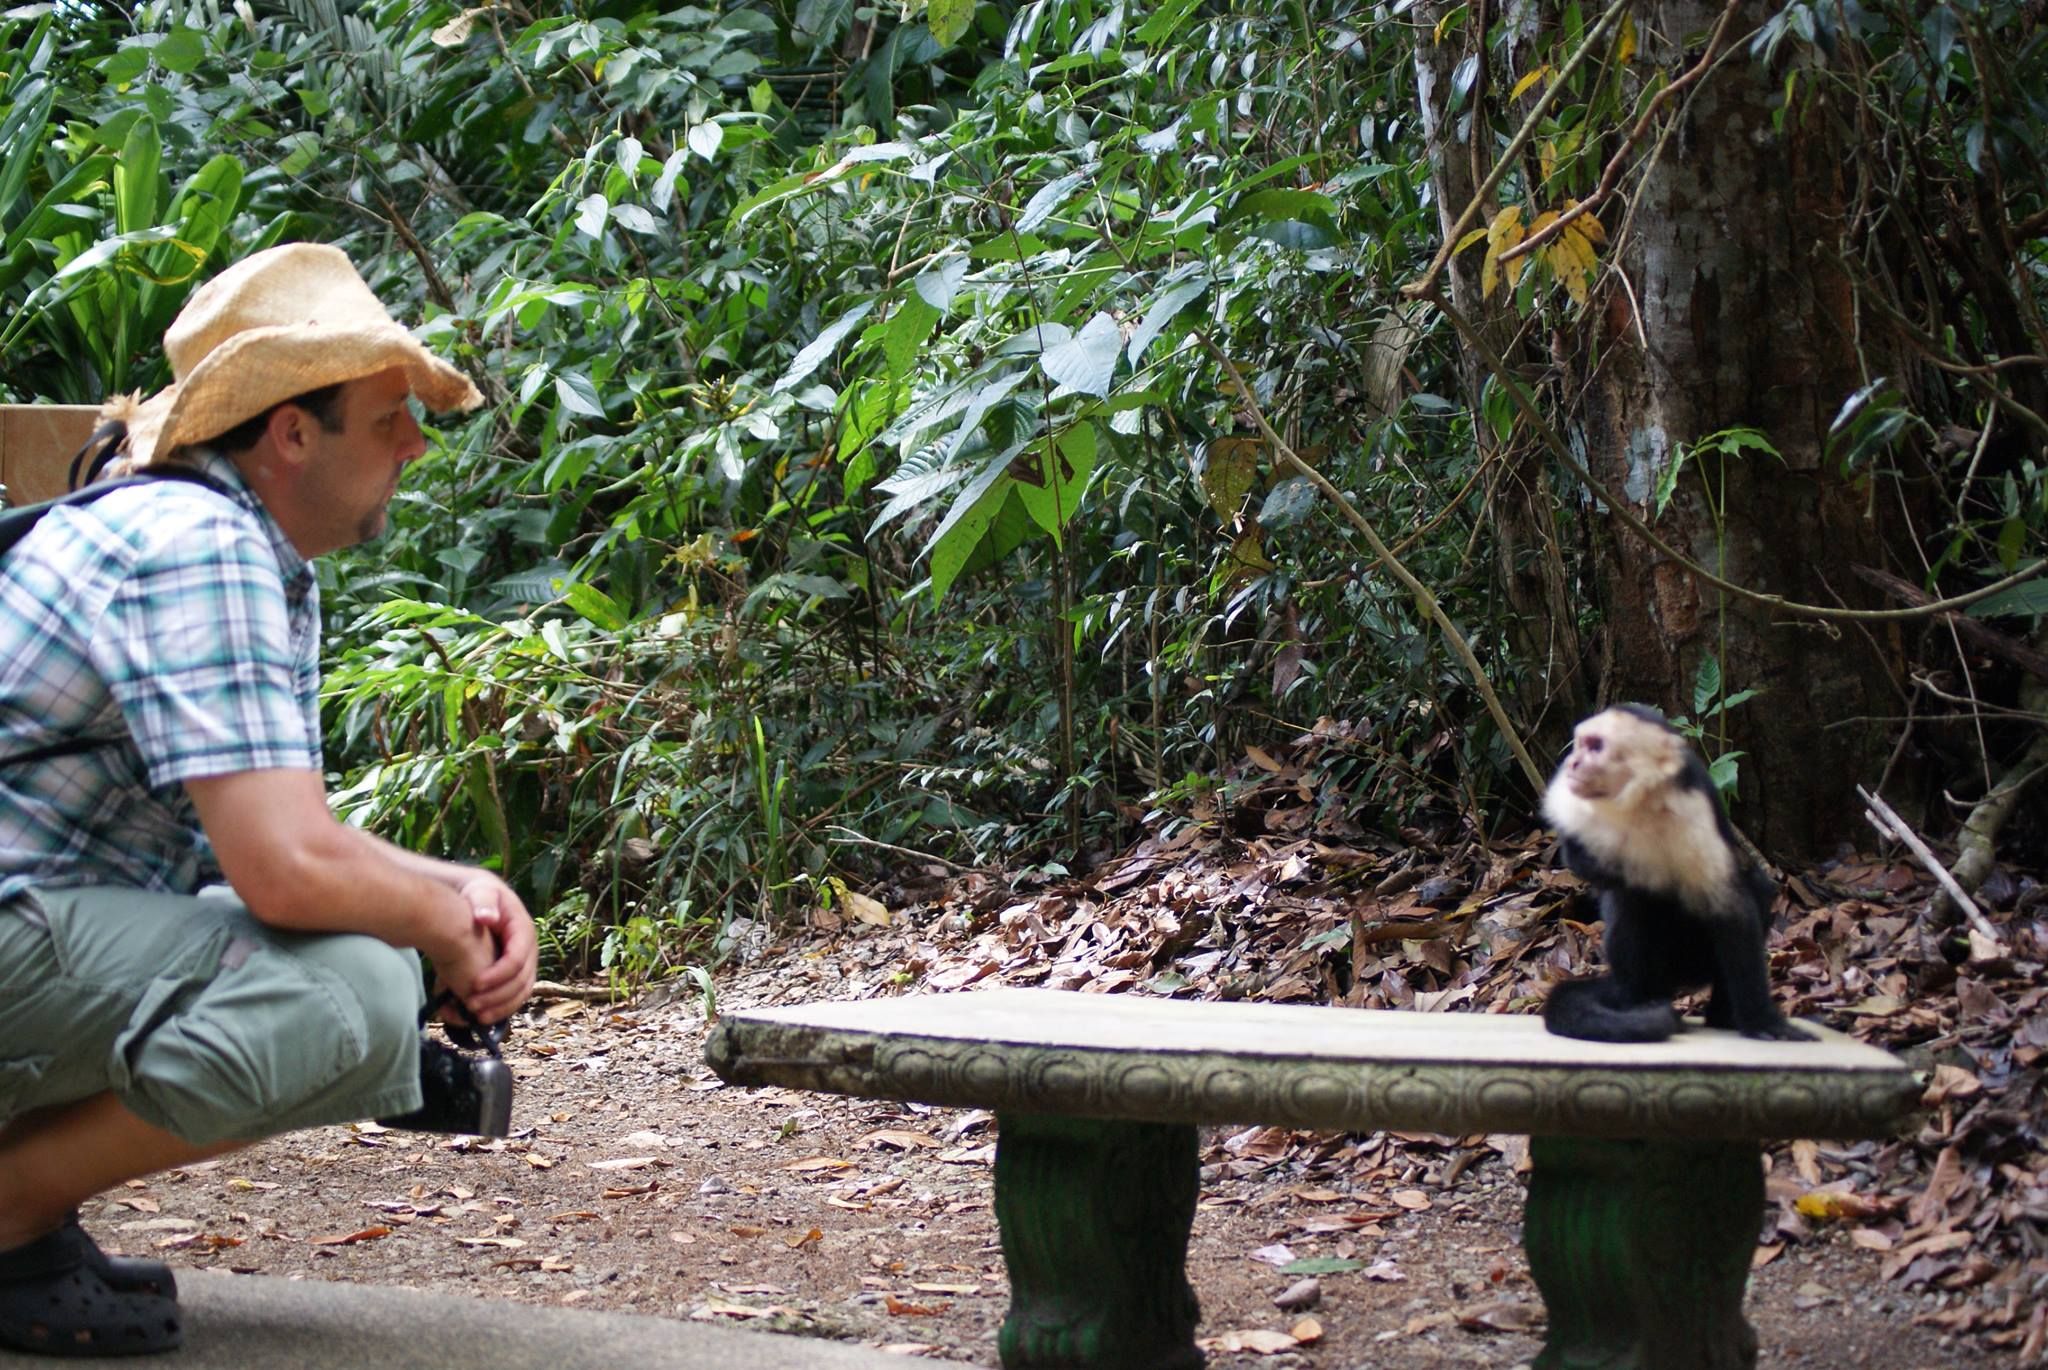 Manuel Antonio National Park Is One of Several Nearby National Parks